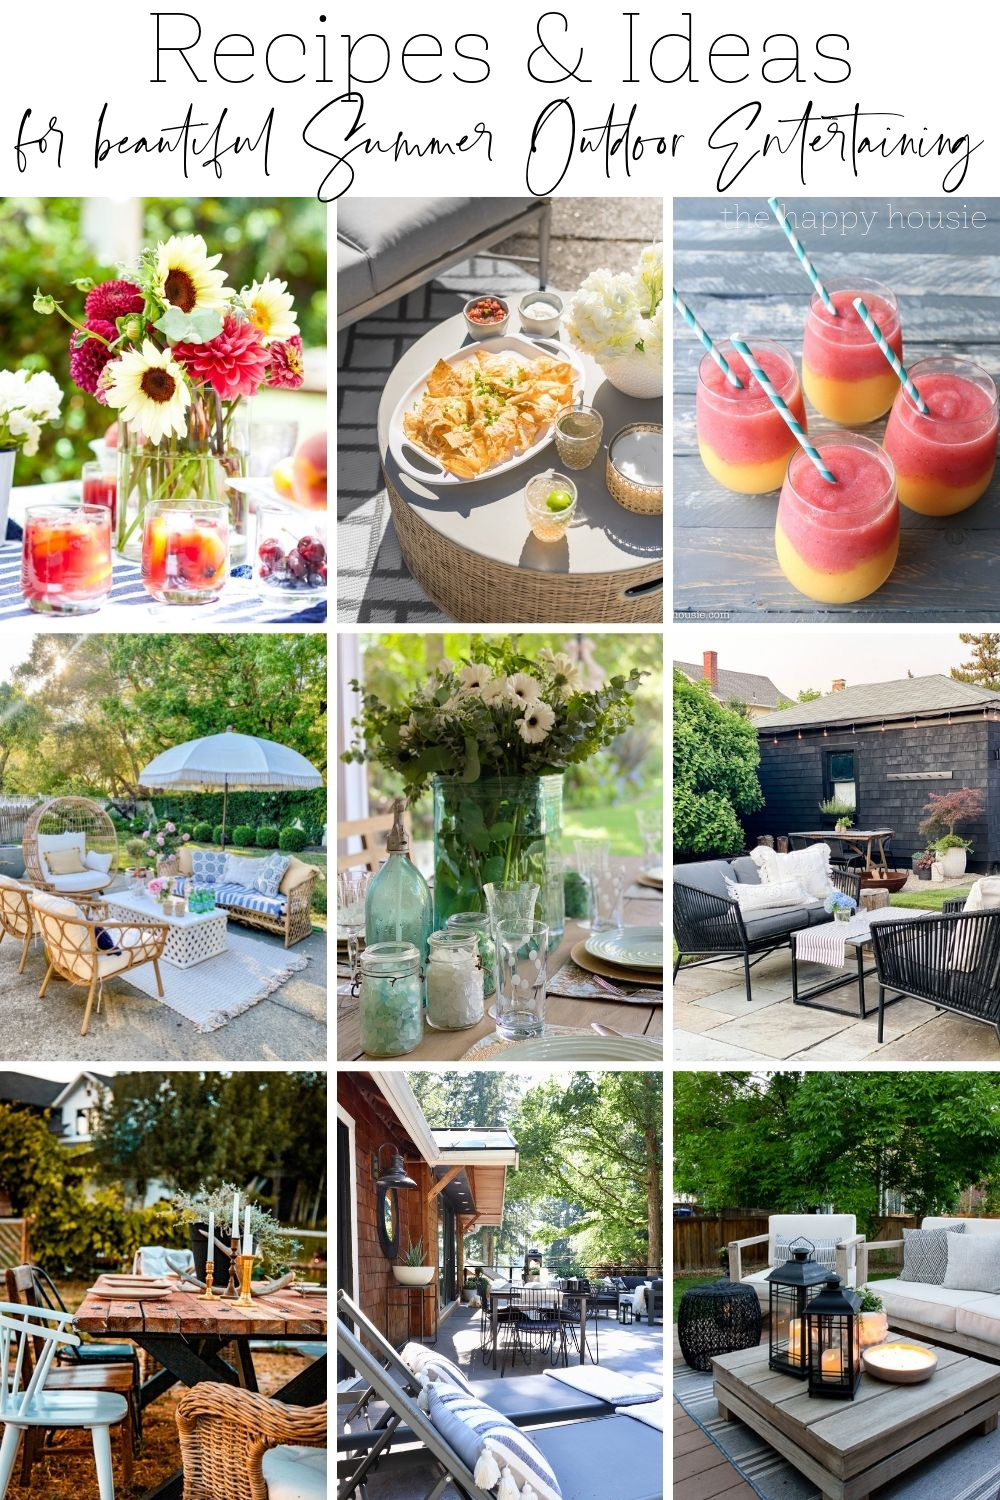 Recipes & Ideas For Beautiful Summer Outdoor Entertaining poster.